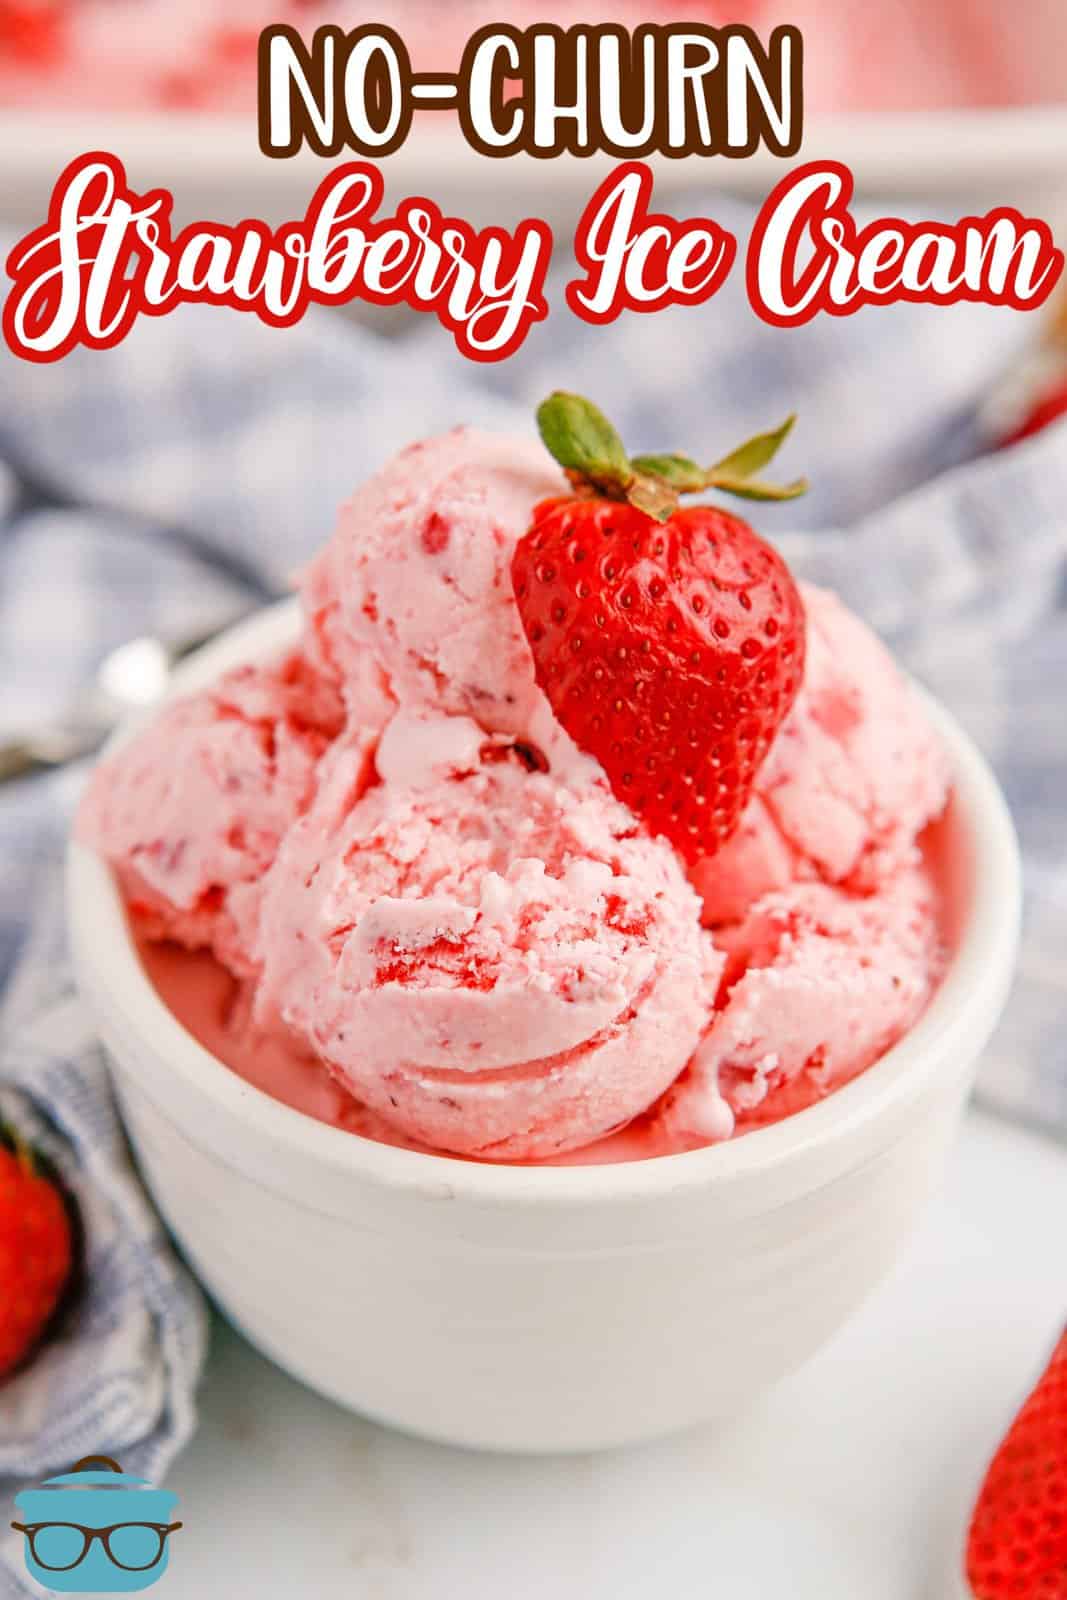 Pinterest image of No-Churn Strawberry Ice Cream garnished with a slice of strawberry.